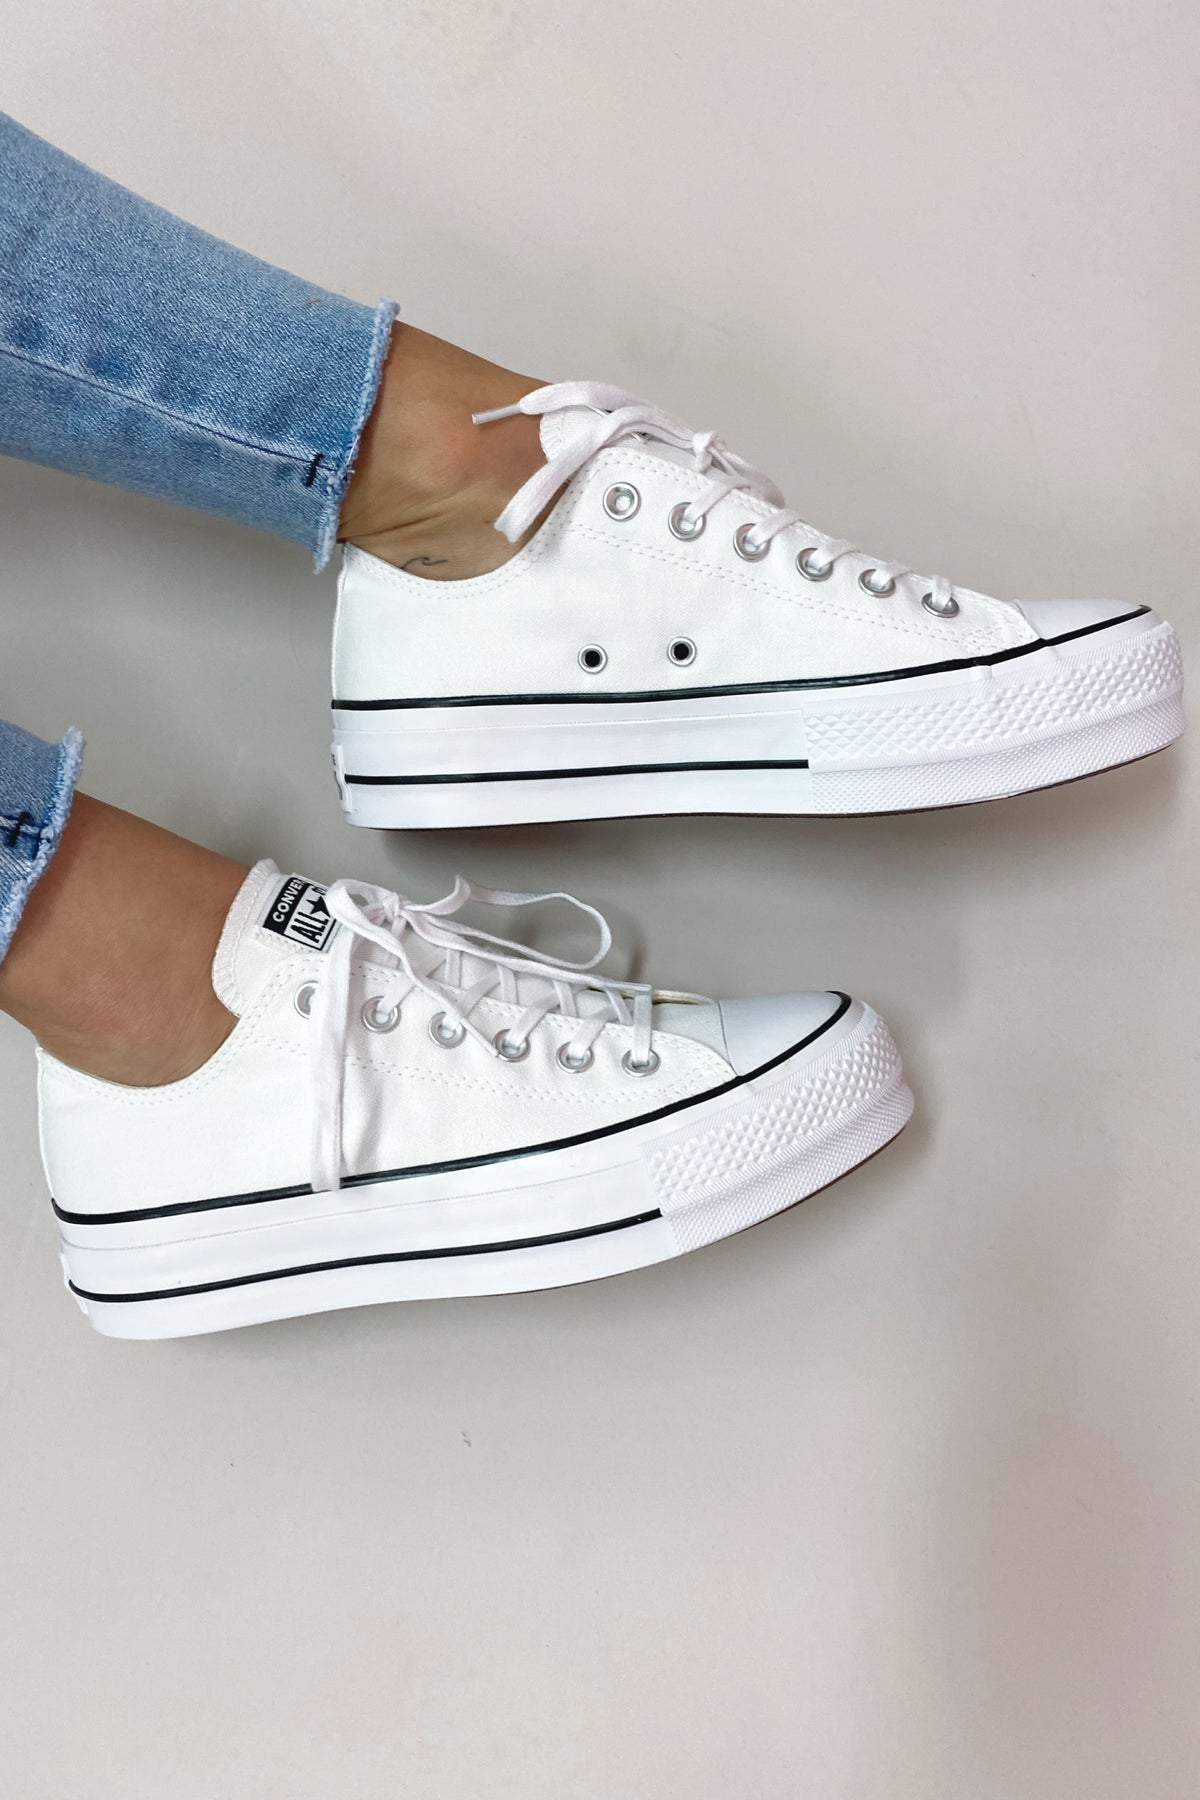 Converse, Shoes, Chuck Taylor All Star High Top White